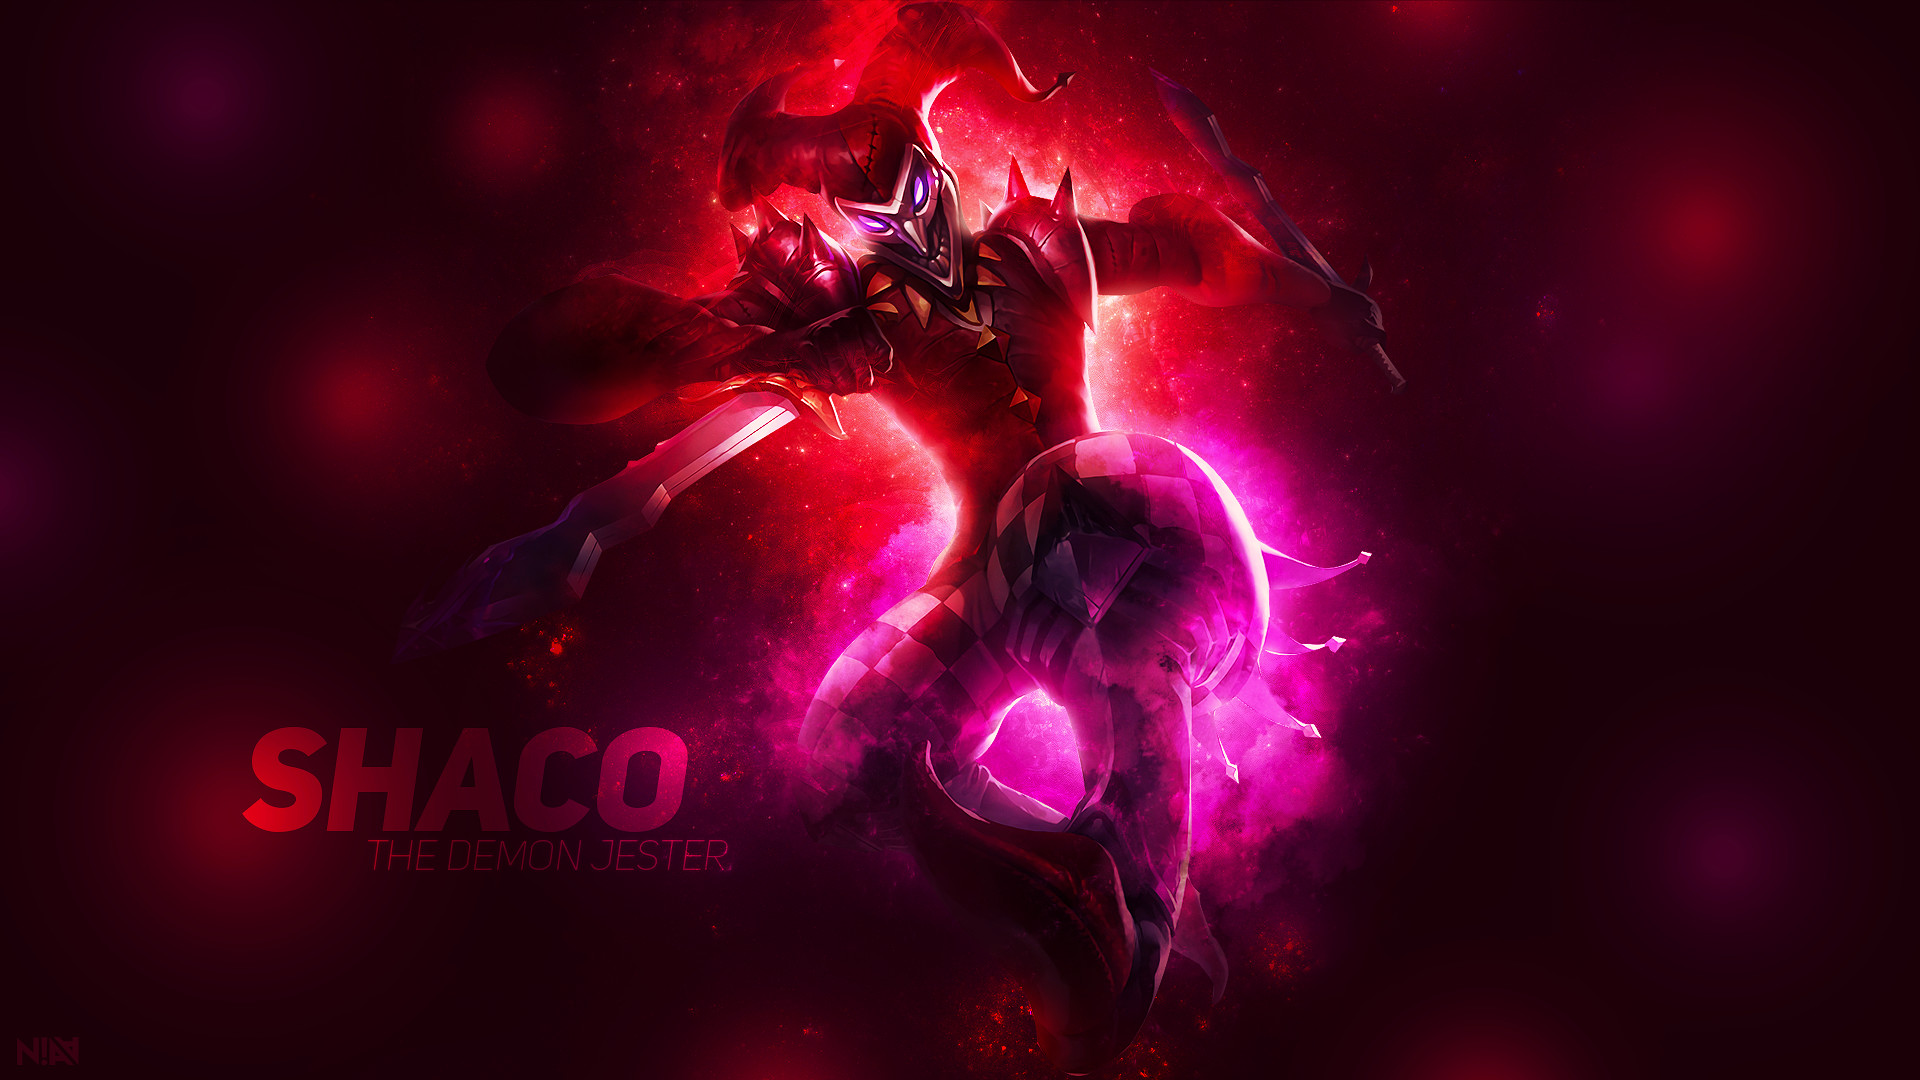 1920x1080 ... Shaco The Demon Jester - Wallpaper  by AliceeMad